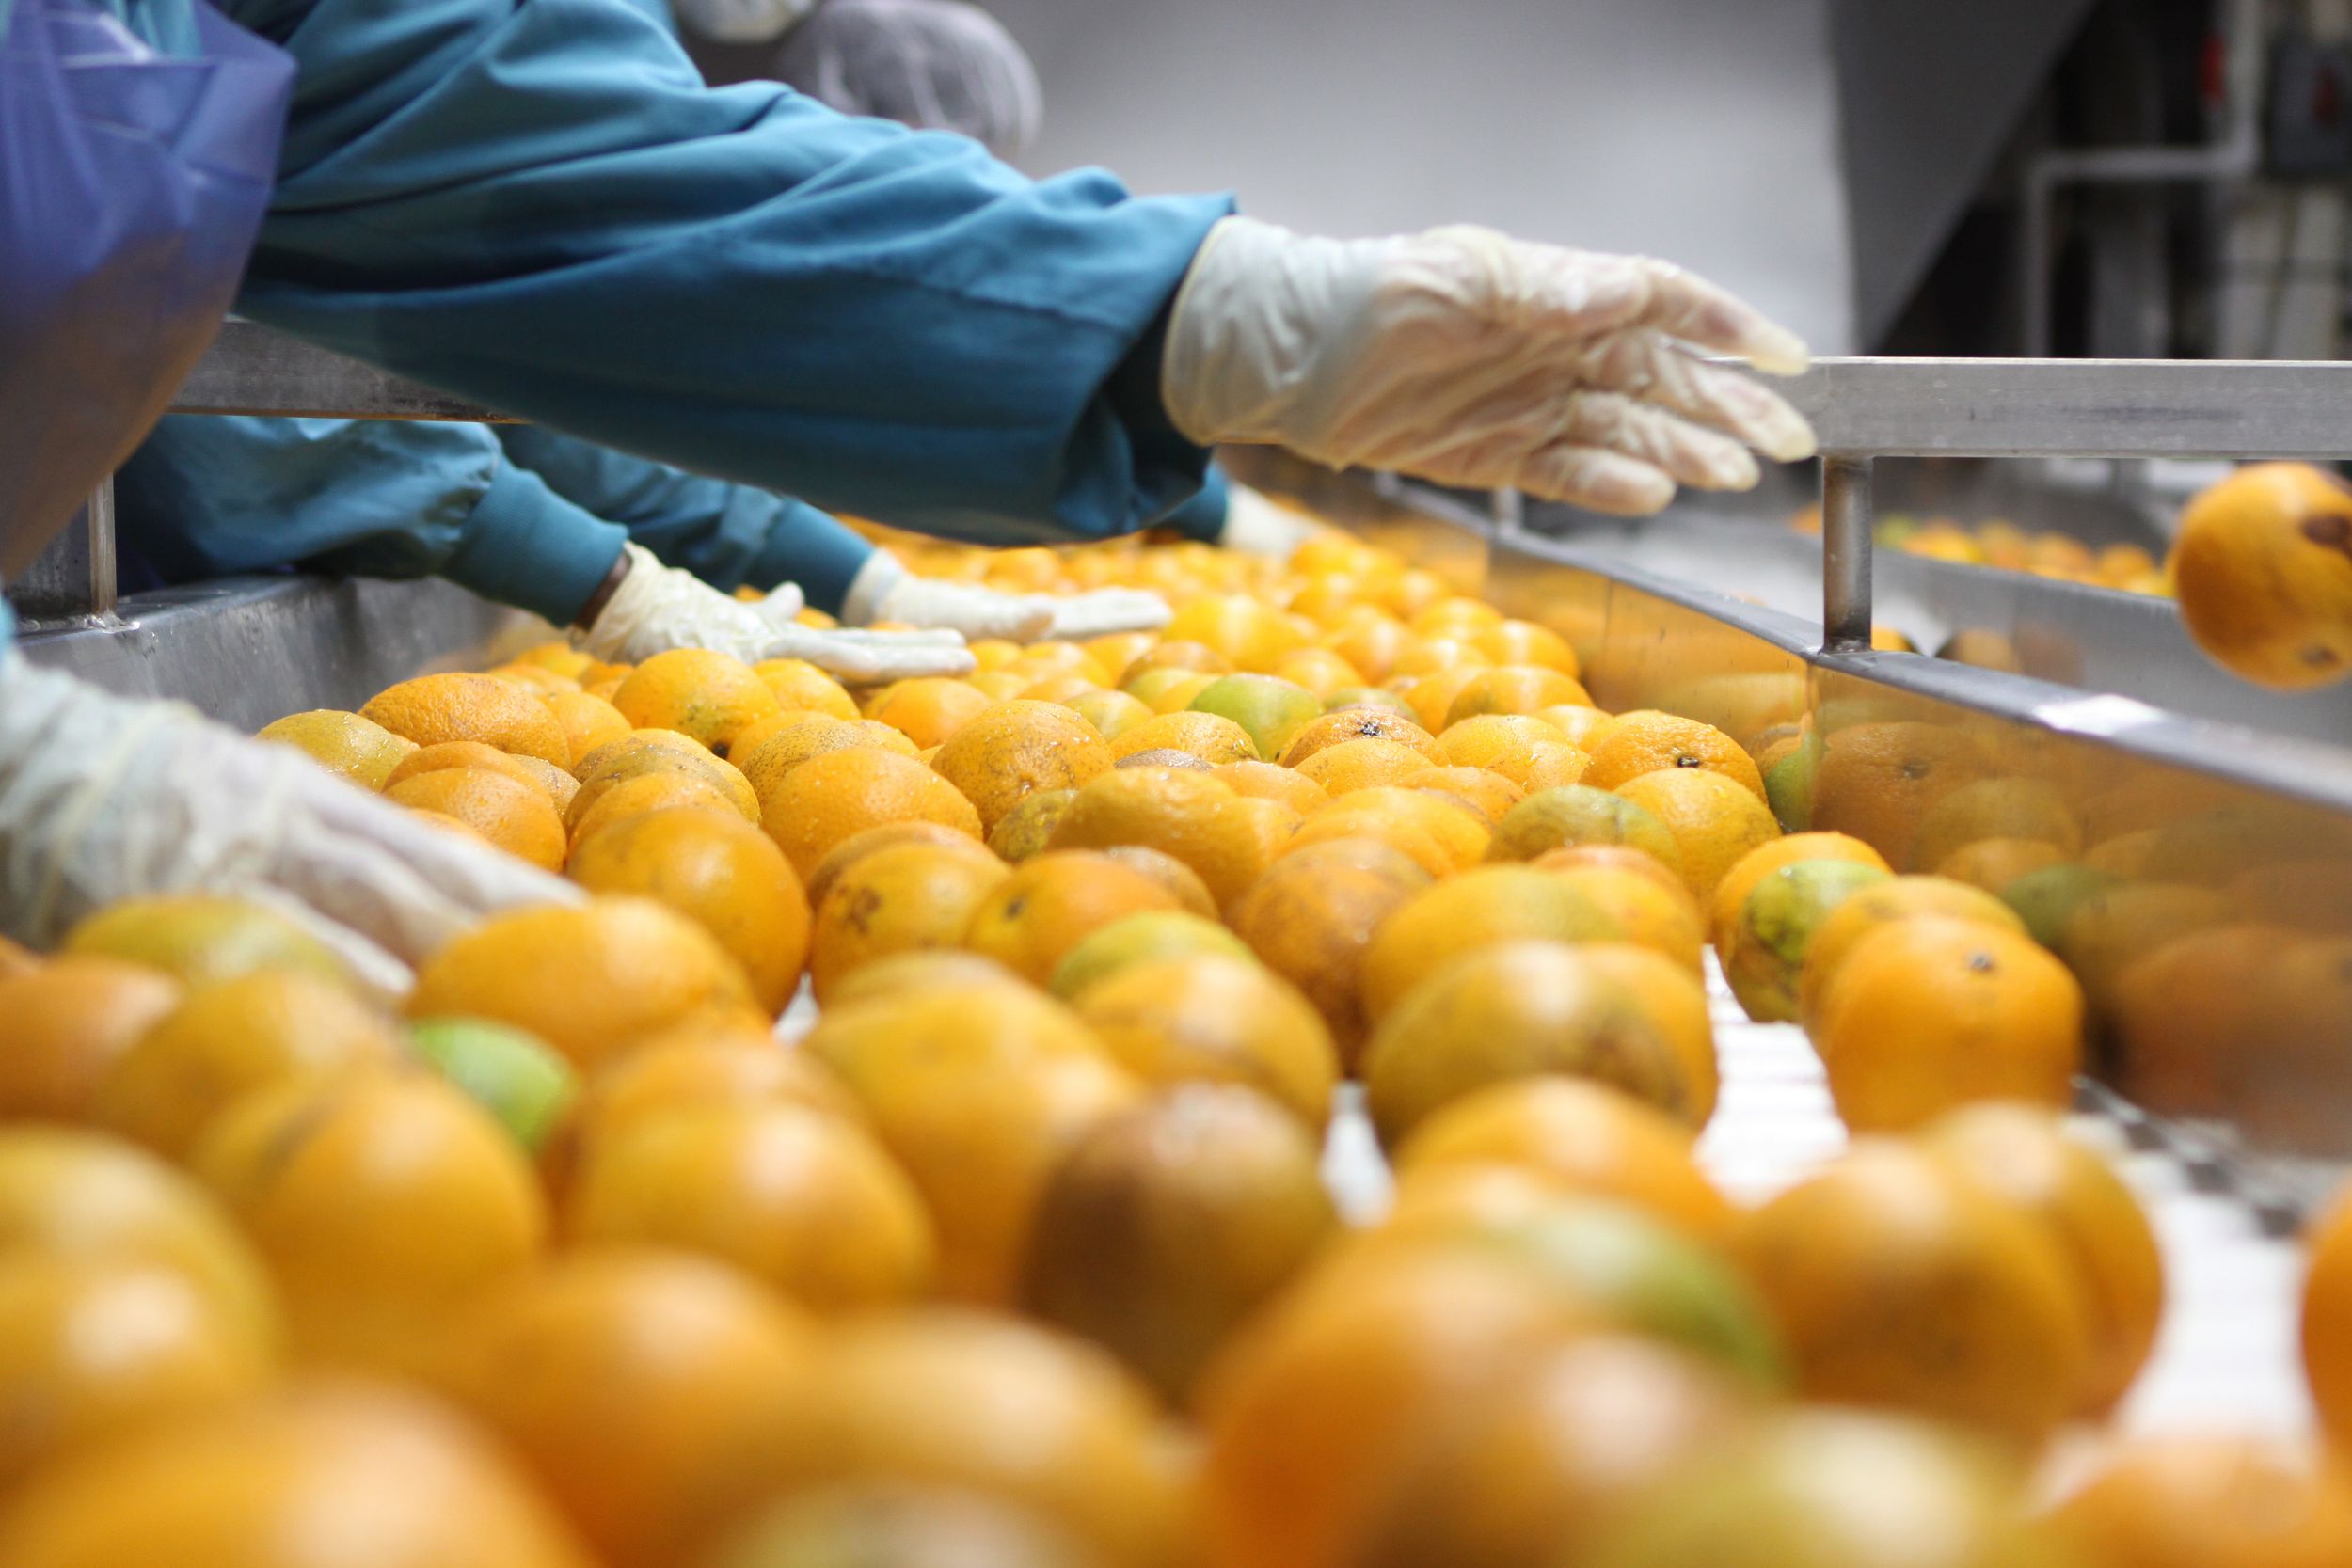 Workers sorting oranges for Natalie's.